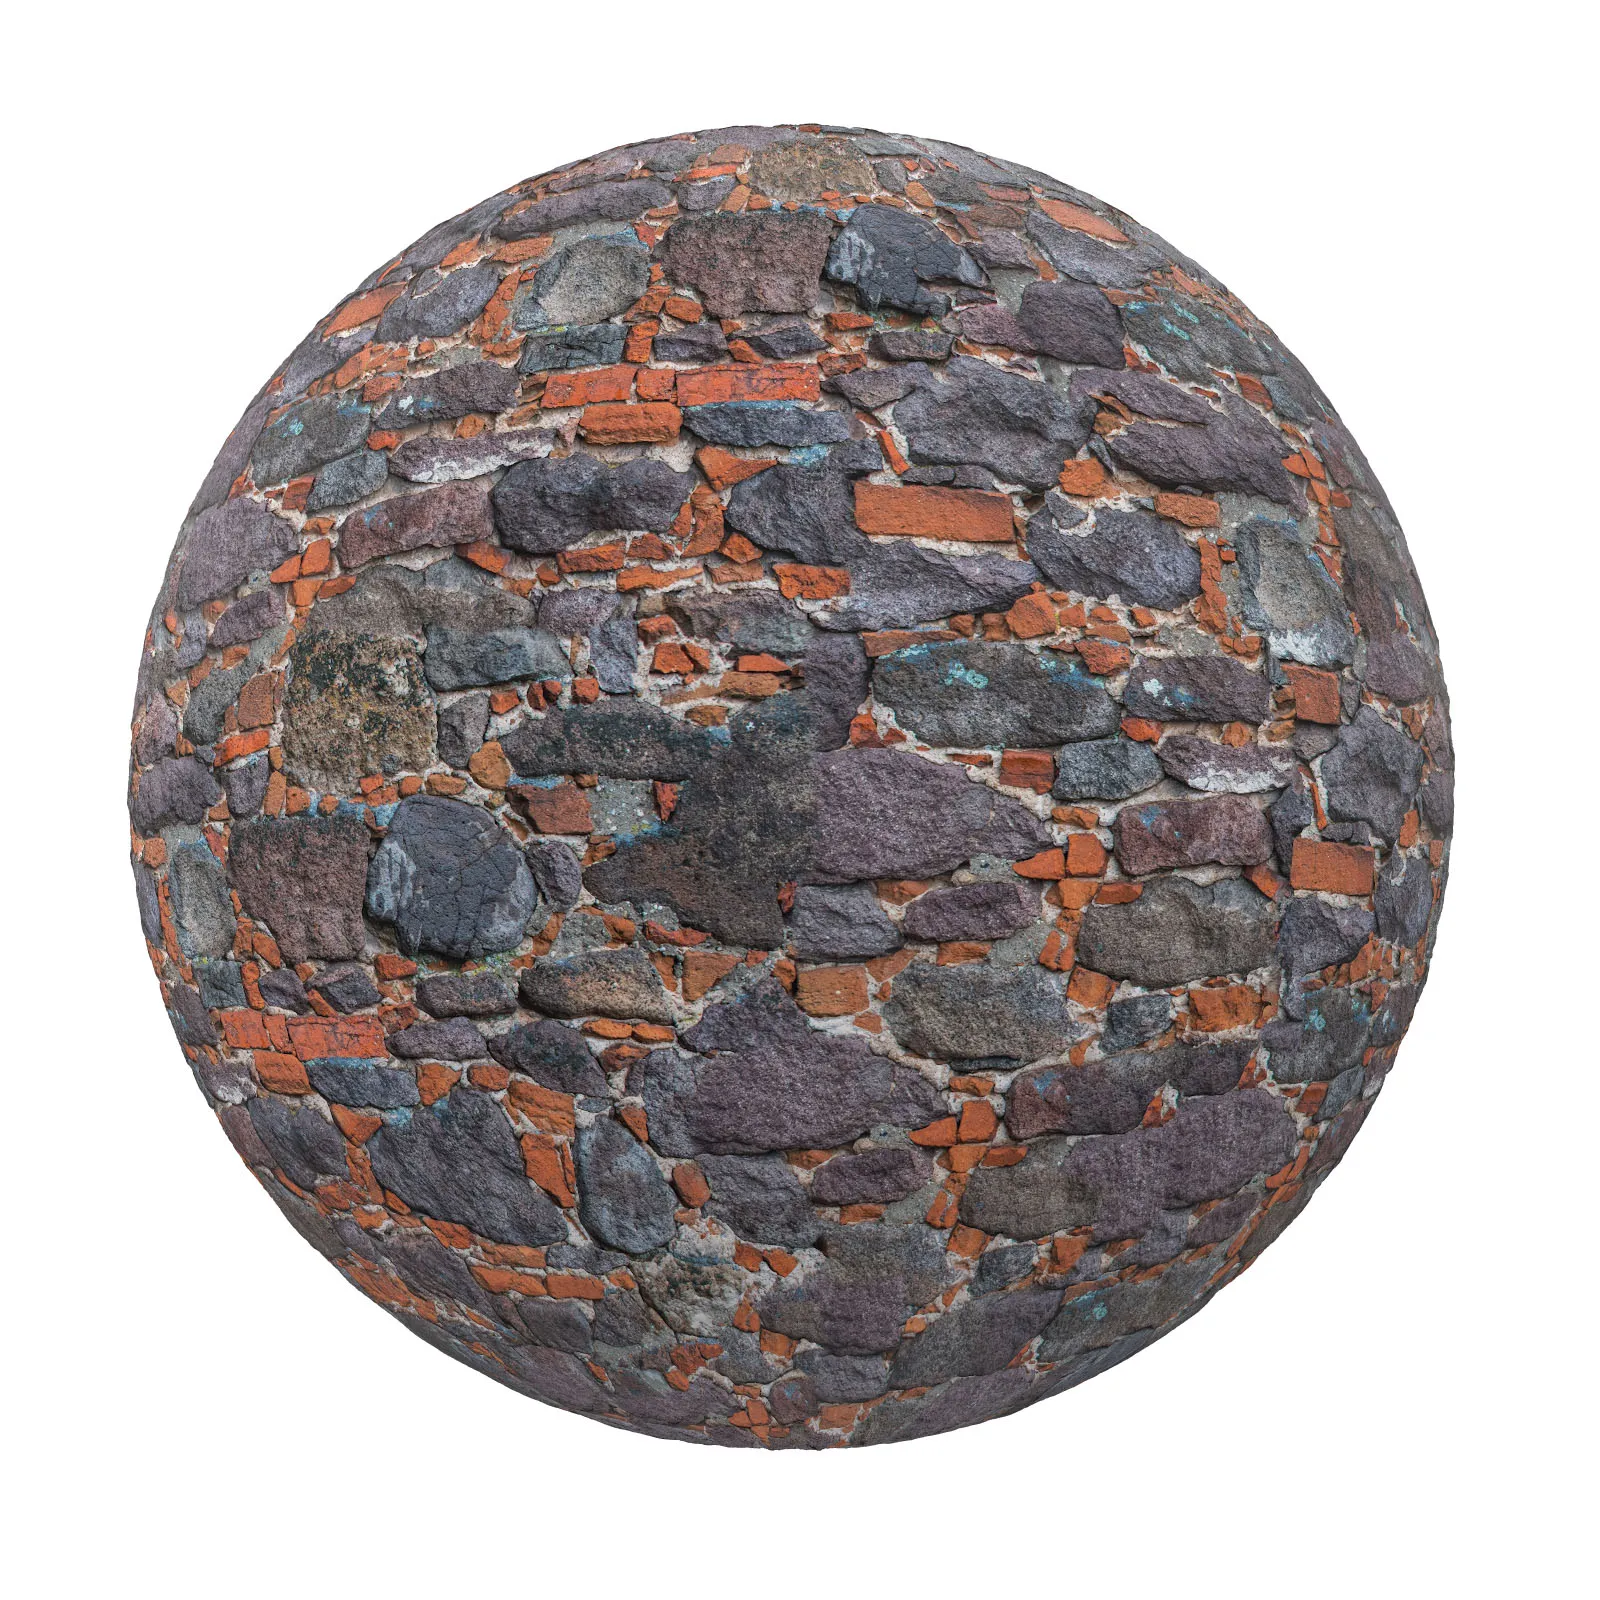 PBR CGAXIS TEXTURES – BRICK – Old Stone And Brick Wall